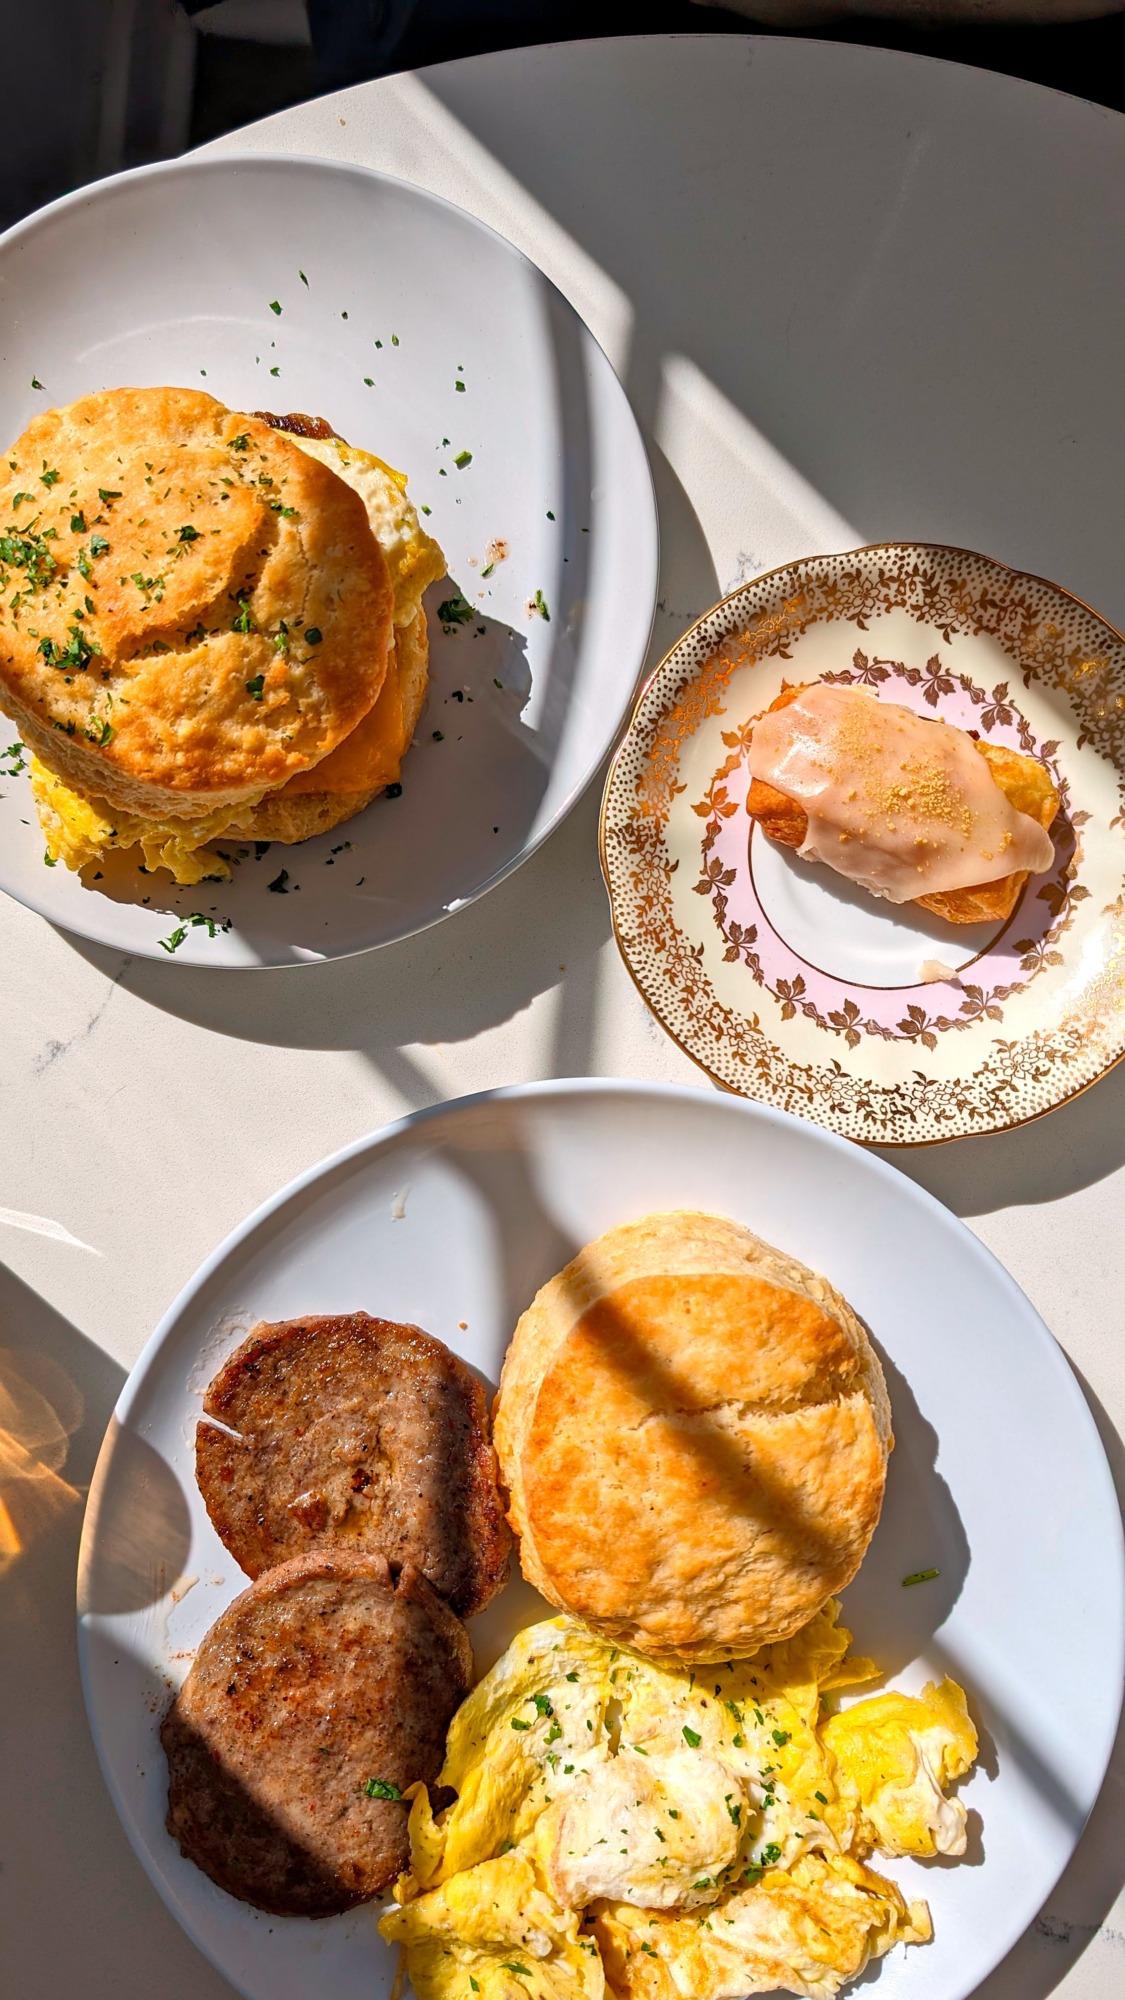 Biscuits, eggs, and sausage on a brightly lit table with a little pastry